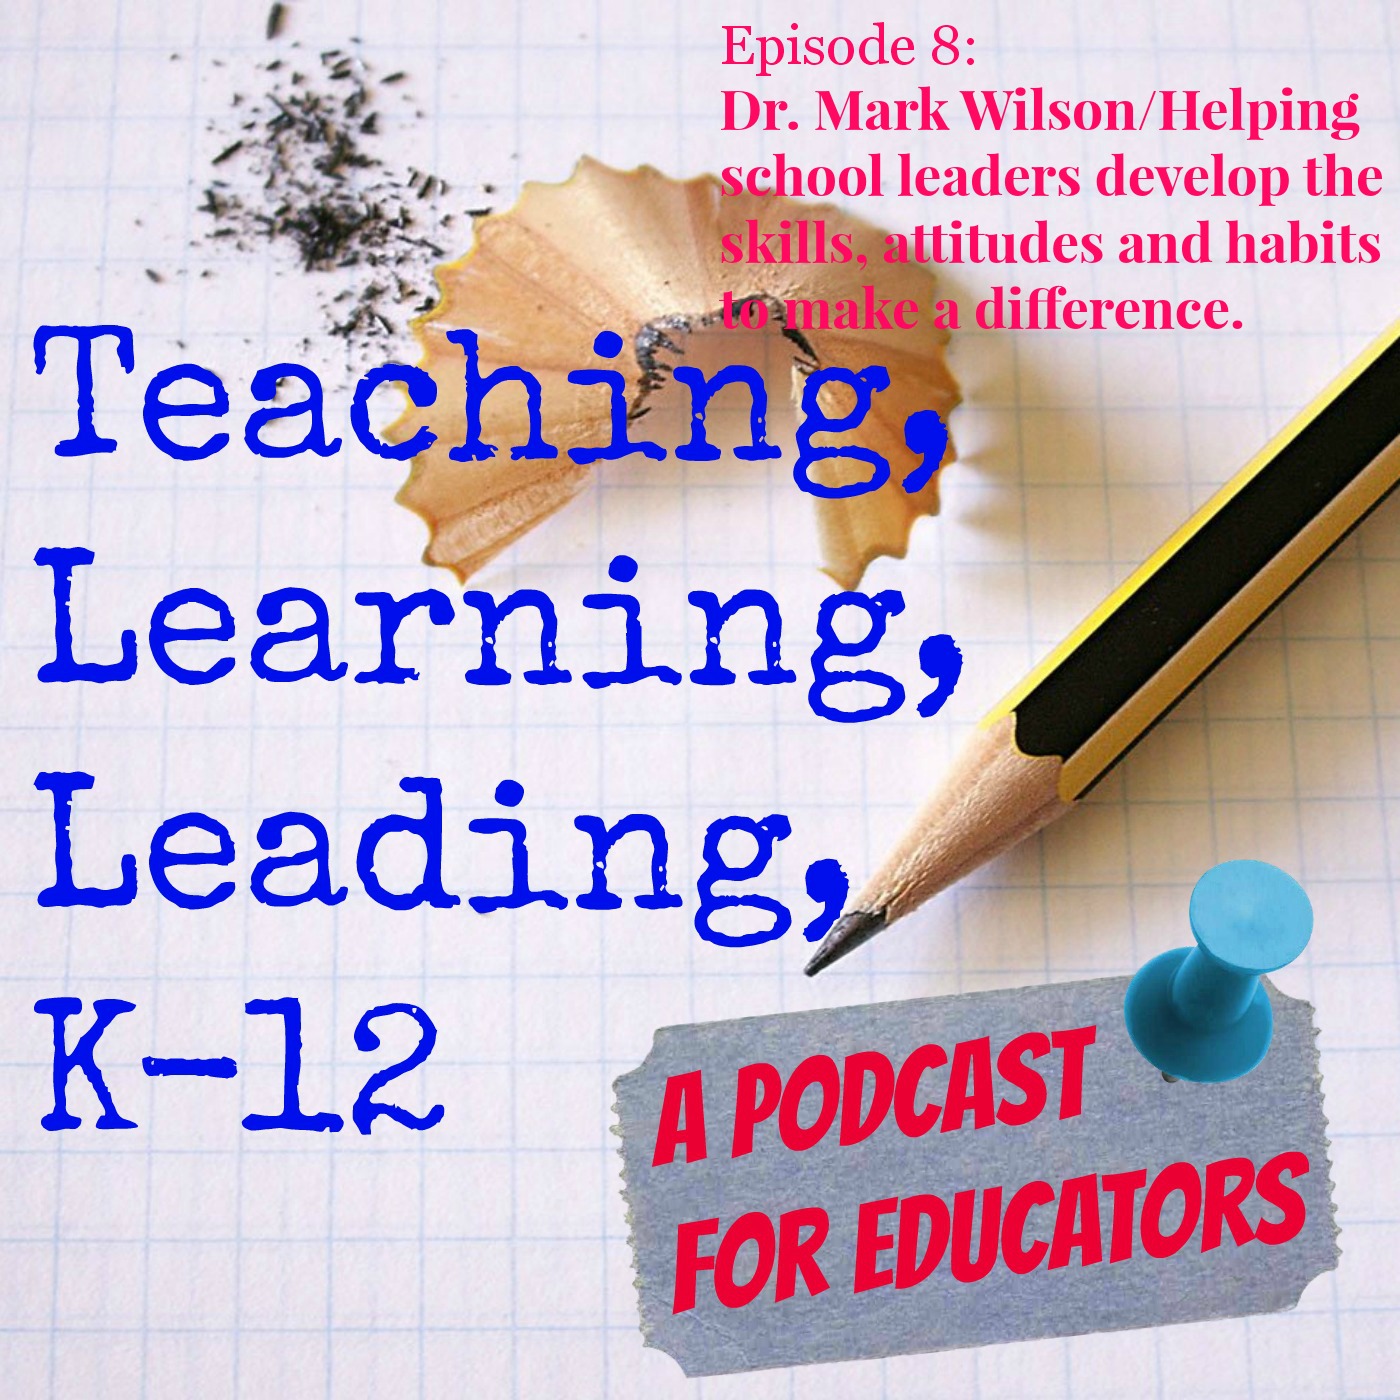 Episode 8: Dr. Mark Wilson/Helping school leaders develop the skills, attitudes, and habits to make a difference.